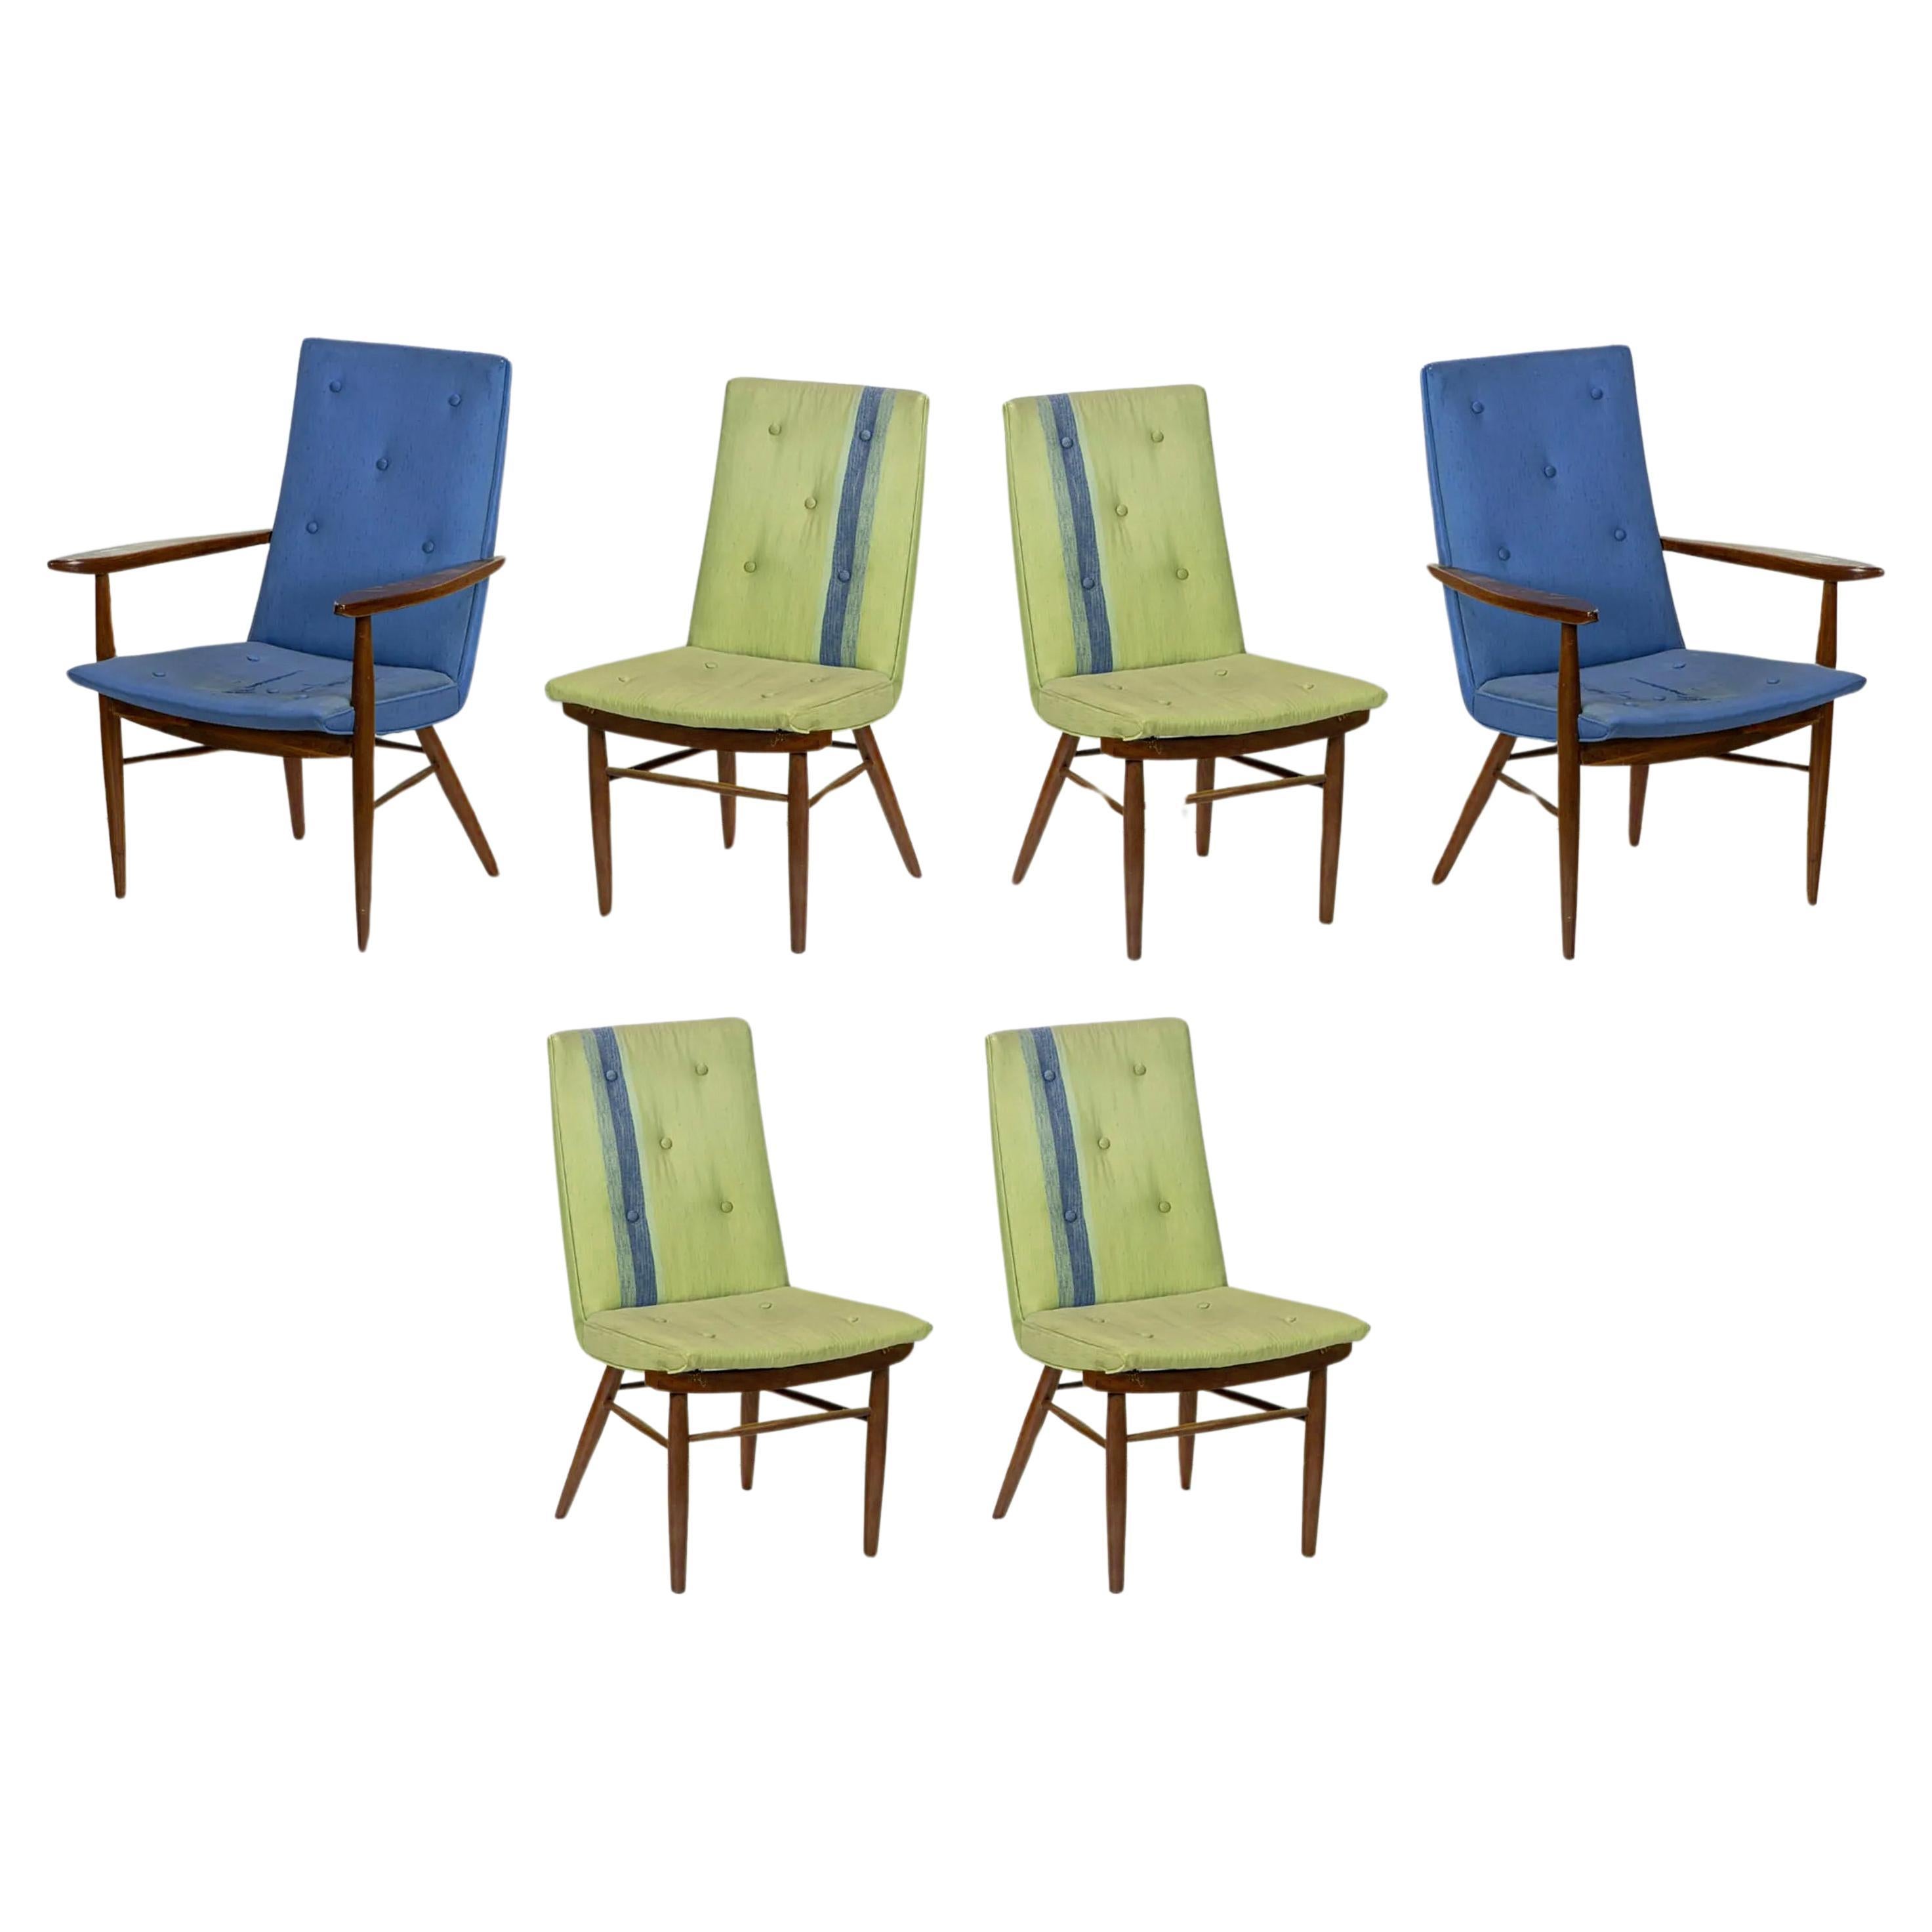 Midcentury Set of 6 Dining Chairs by George Nakashima